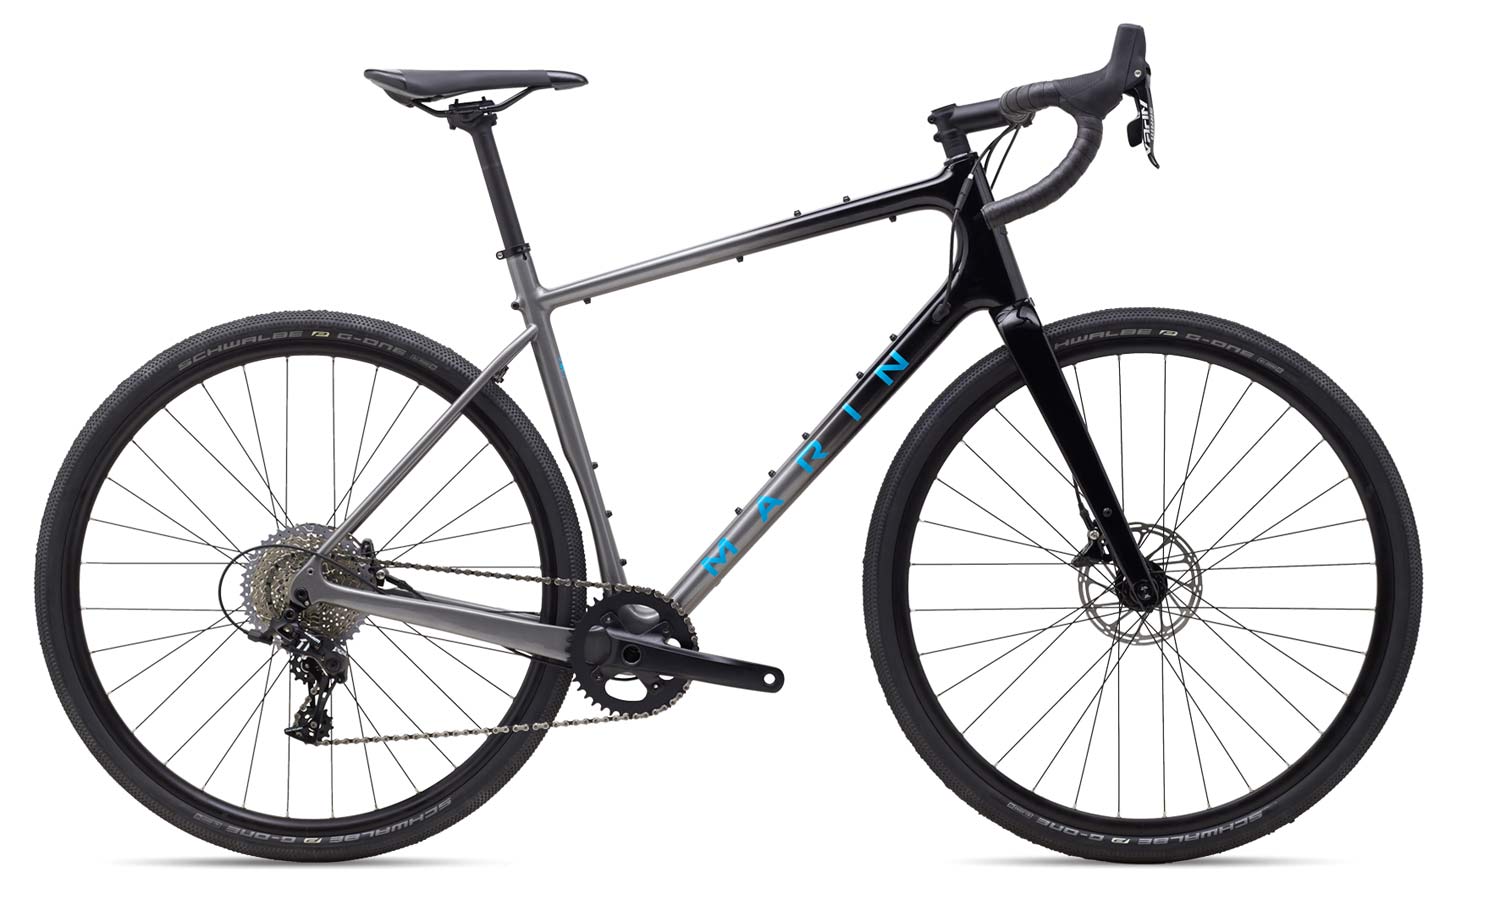 2020 Marin gravel and all-road commuter bikes, carbon alloy steel